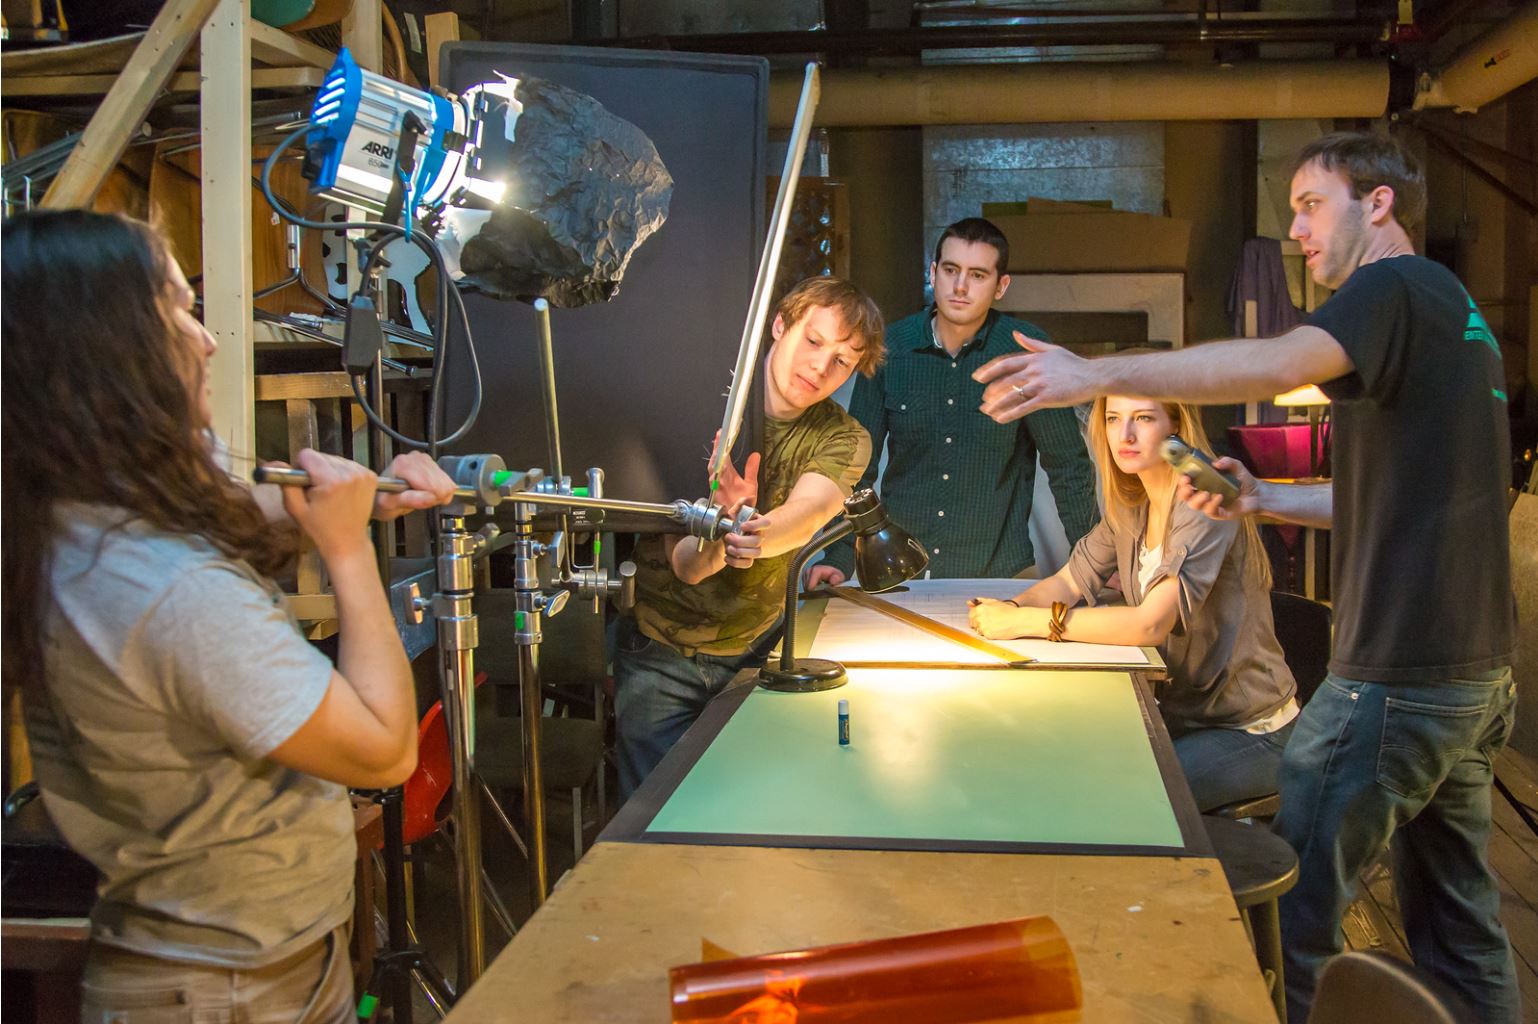 Guest lecturer Dave Selle, right, instructs students on lighting for a scene during the 2013 Wintermester cinematography class in the UAF Fine Arts complex.